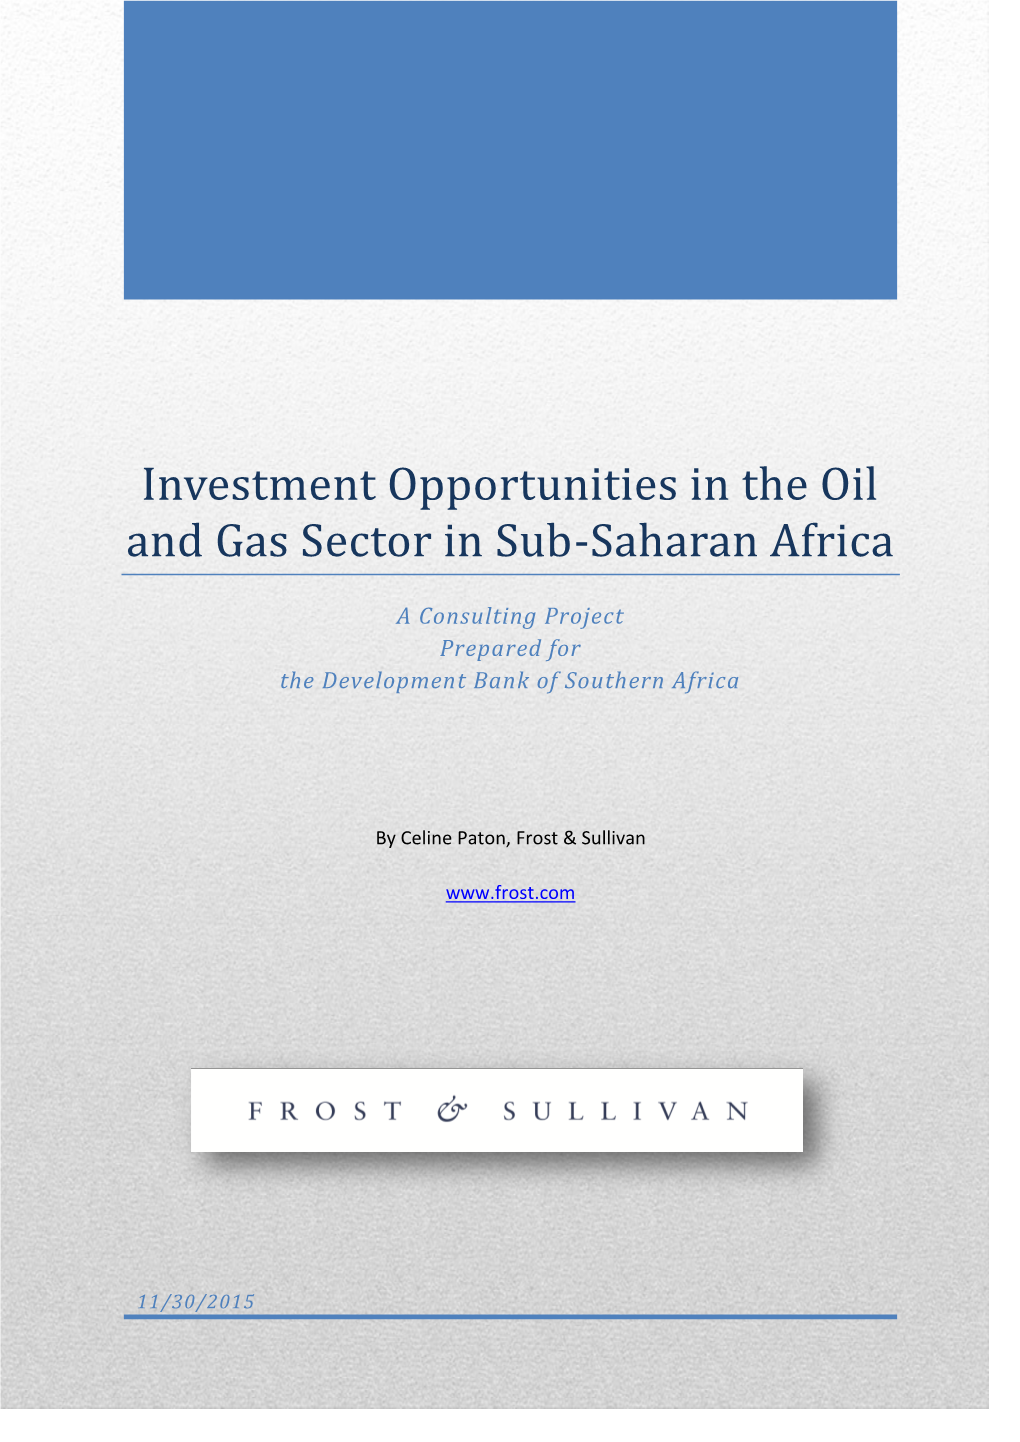 Investment Opportunities in the Oil and Gas Sector in Sub-Saharan Africa a Consulting Project Prepared for the Development Bank of Southern Africa